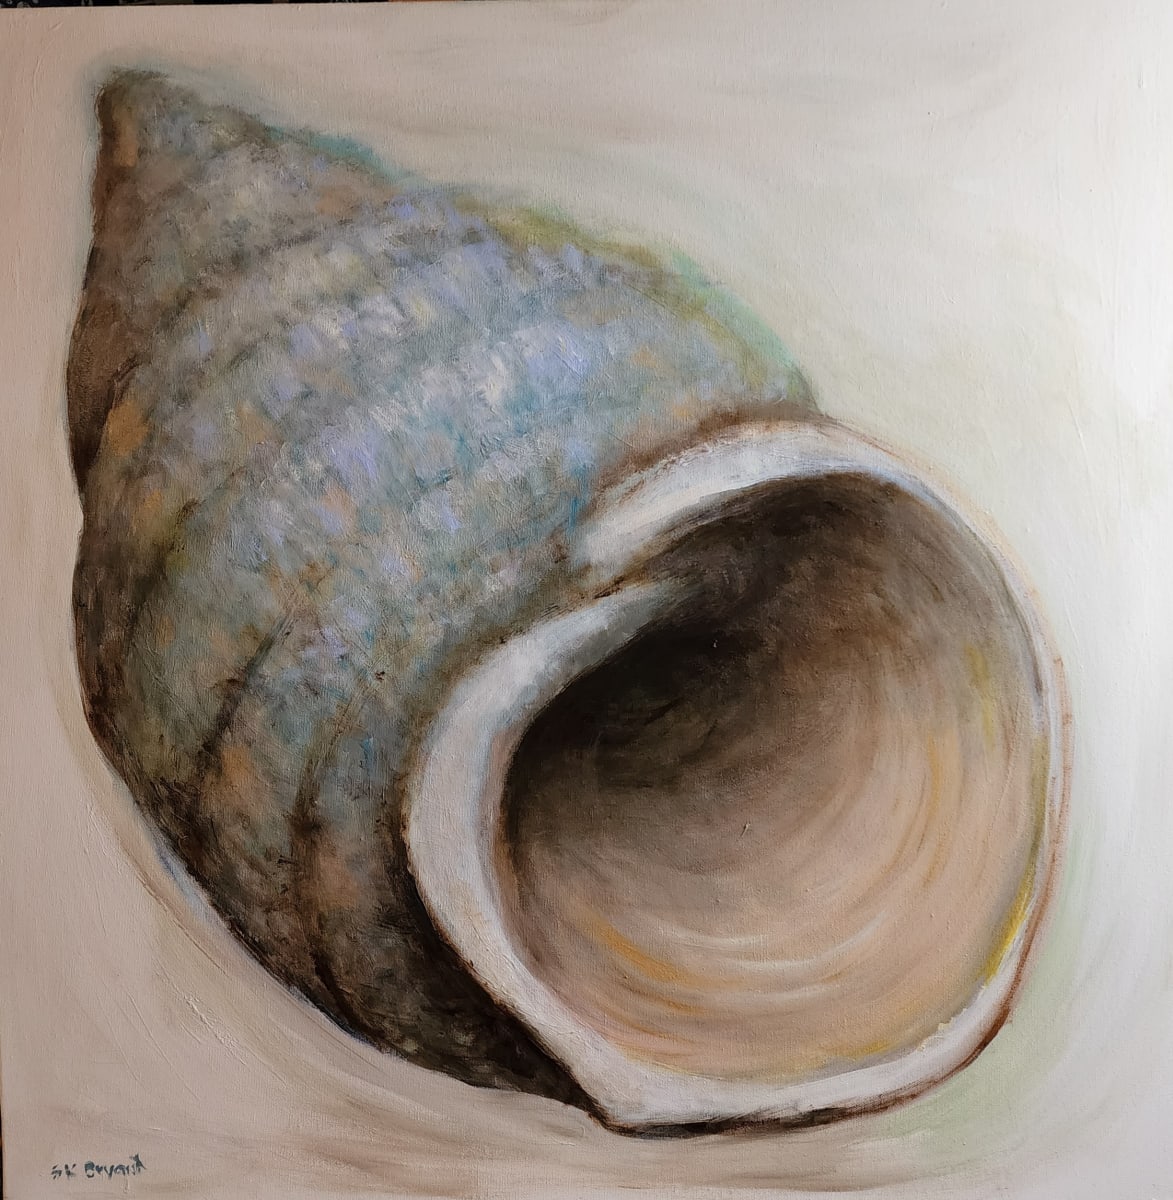 Shell Mirage by Susan Bryant  Image: From my mother's shell collection